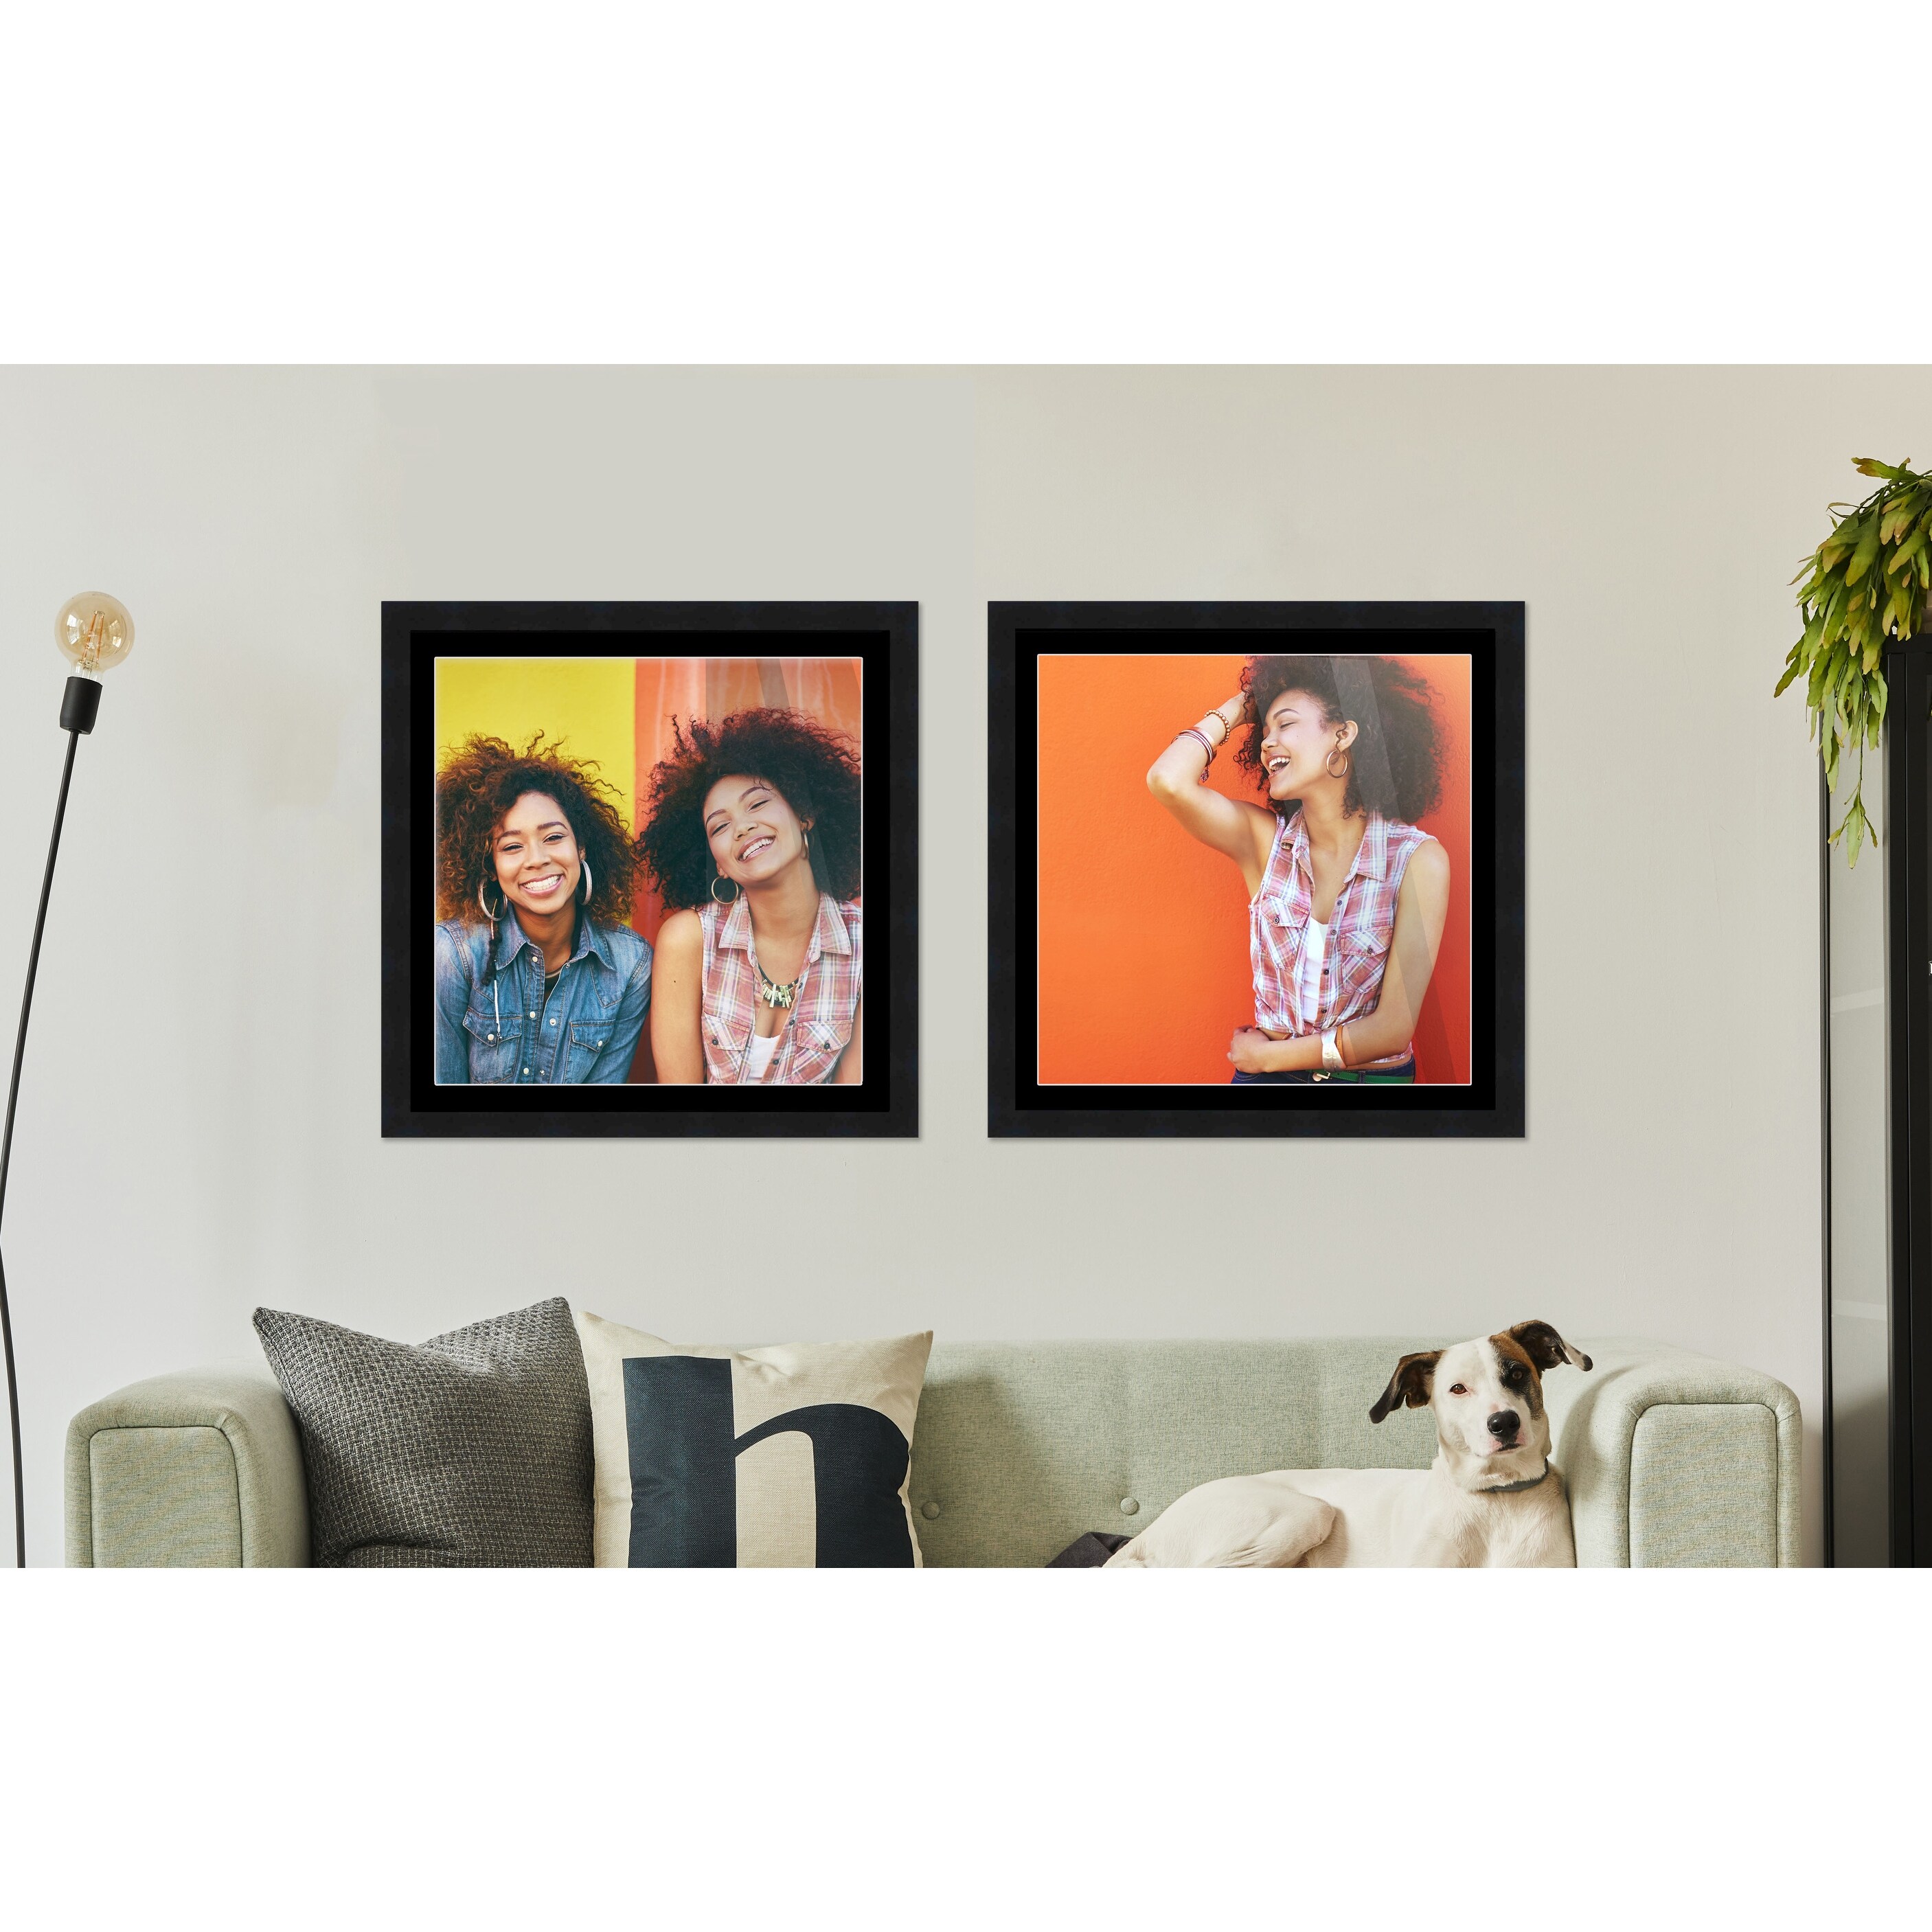 Gallery Wall Gold 20x20 Picture Frames 20x20 Frame 20 x 20 Poster